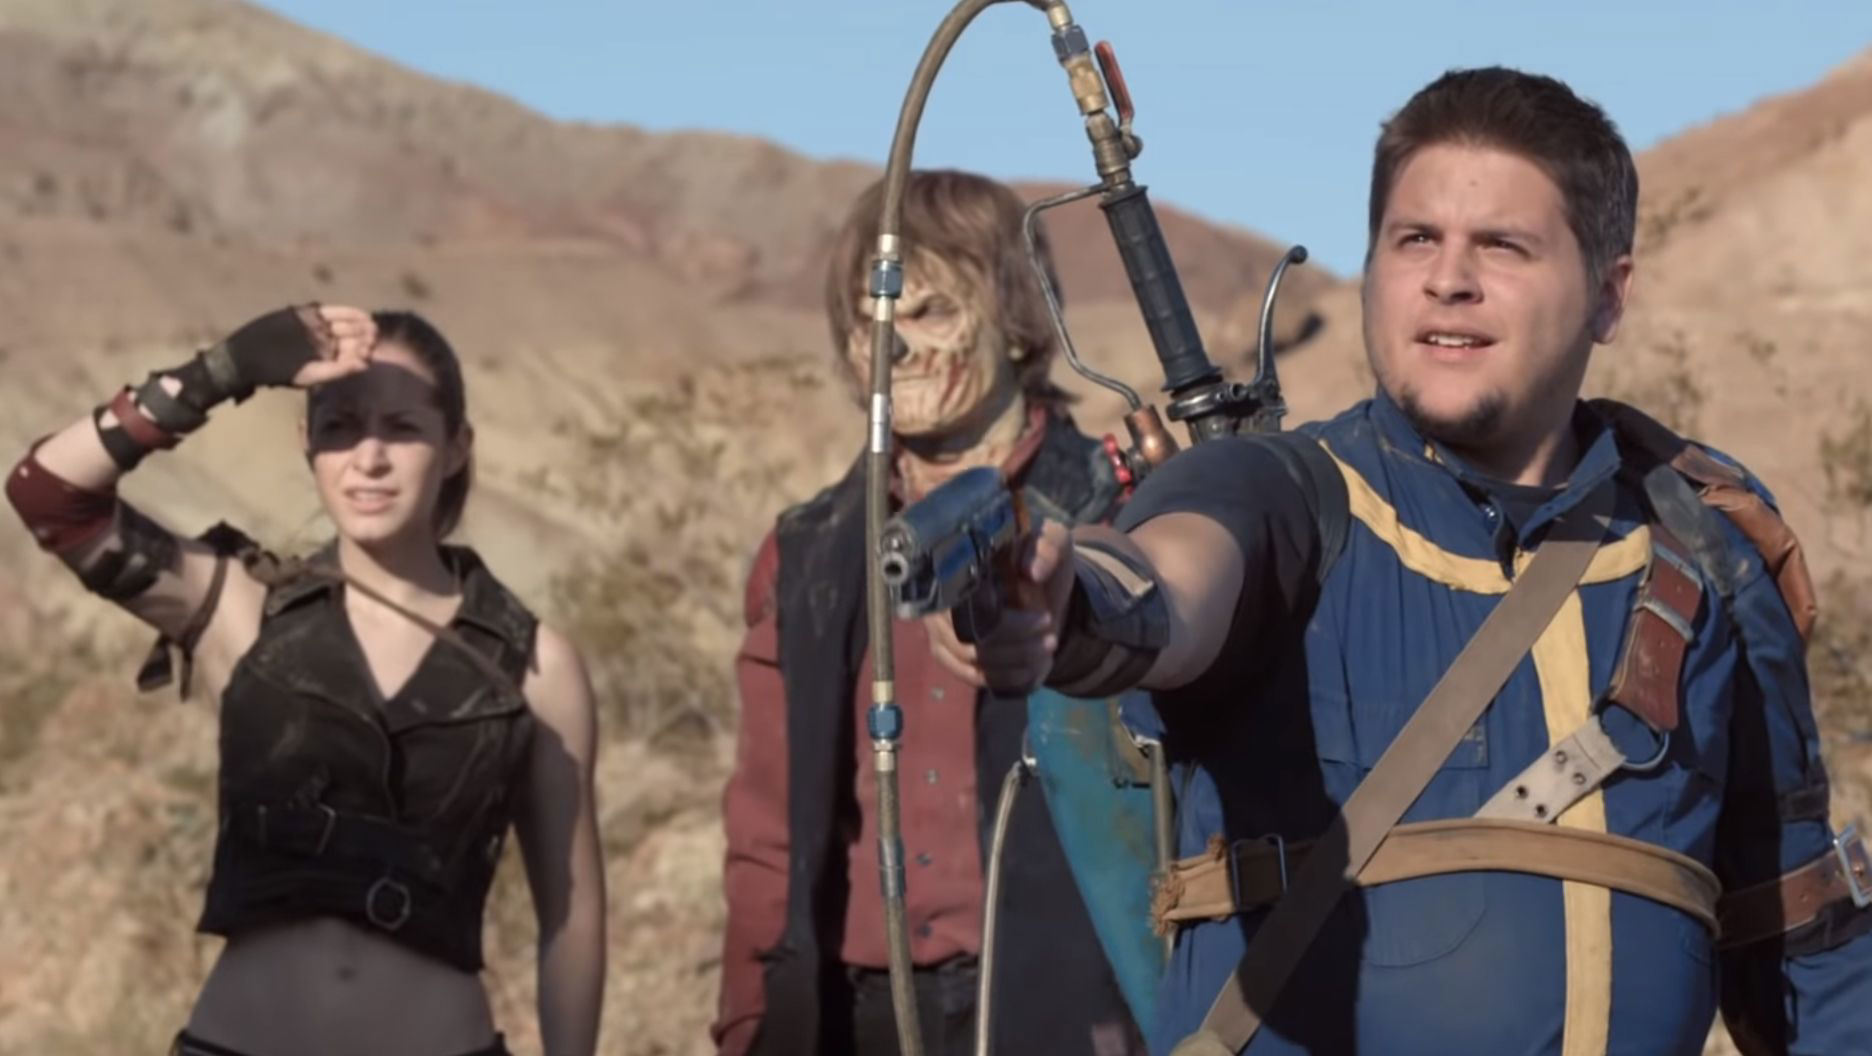 Reminder There's already a Fallout TV series you can watch now for